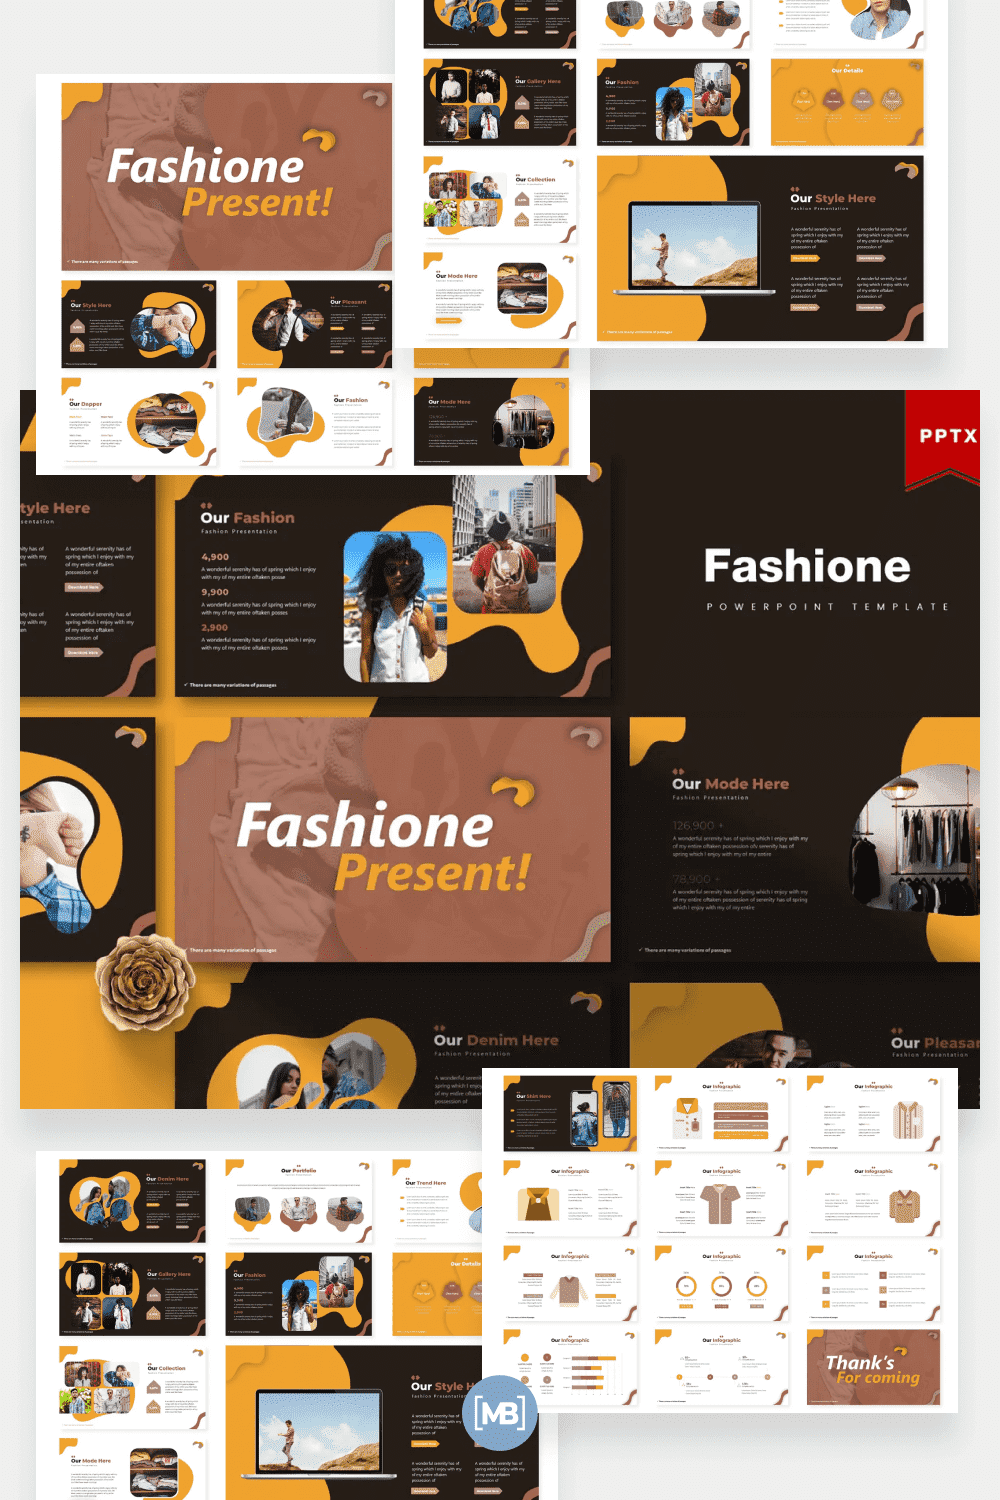 Fashione PowerPoint template.